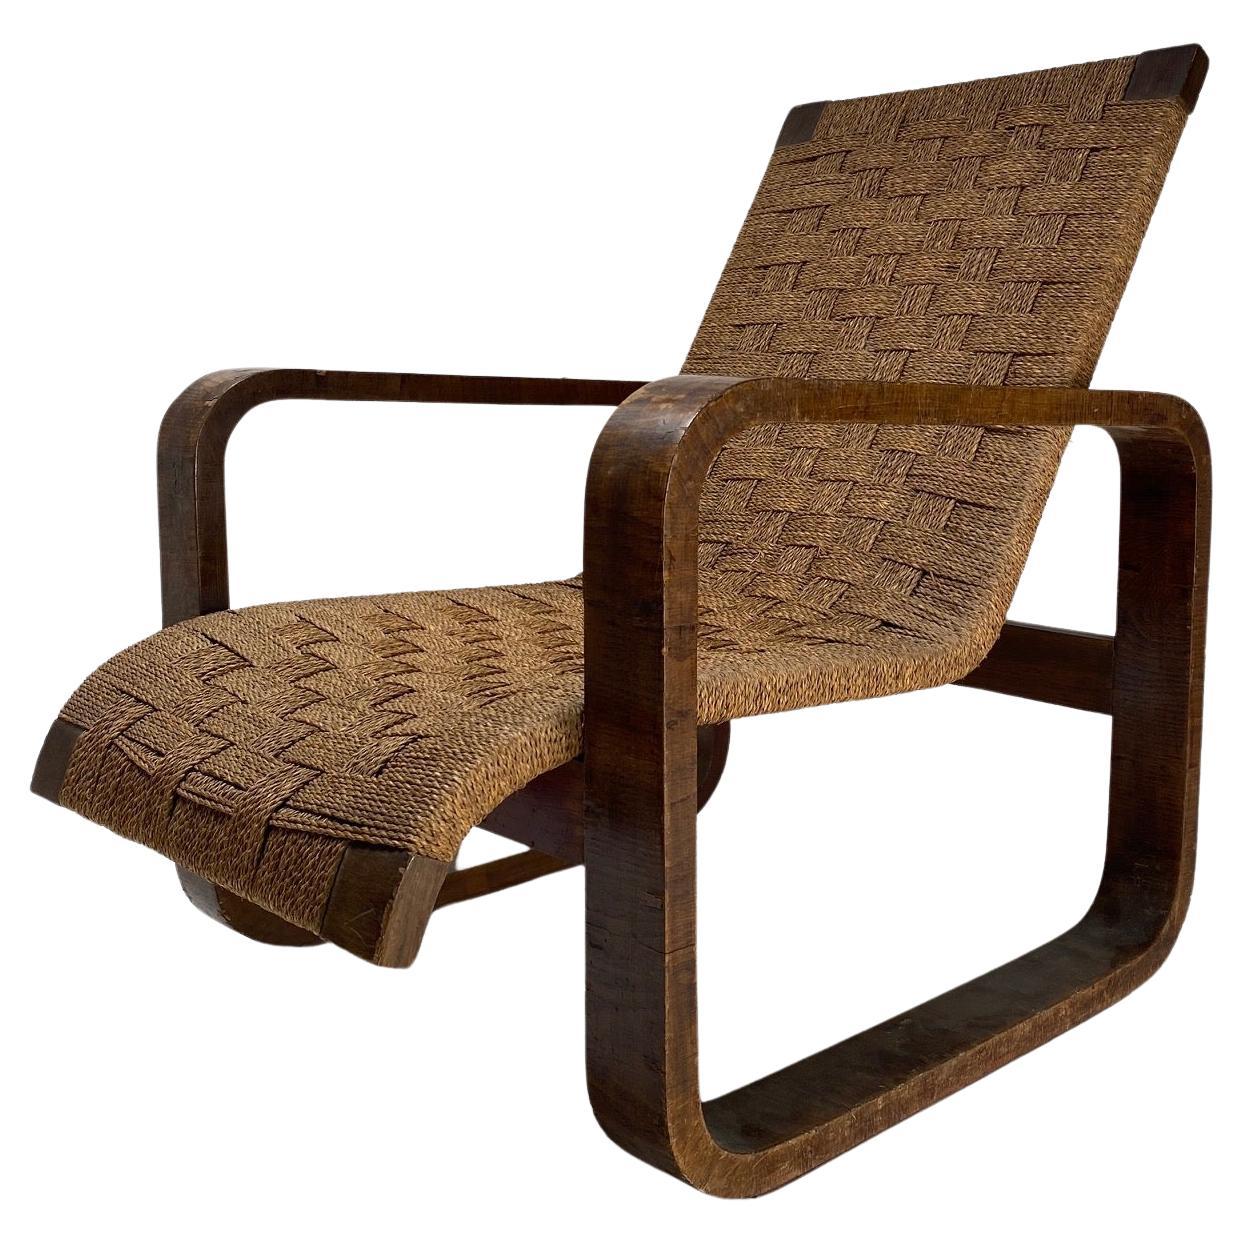 Sculptural Armchair in wood and rope, Giuseppe Pagano (Attr), Italy, 1940s